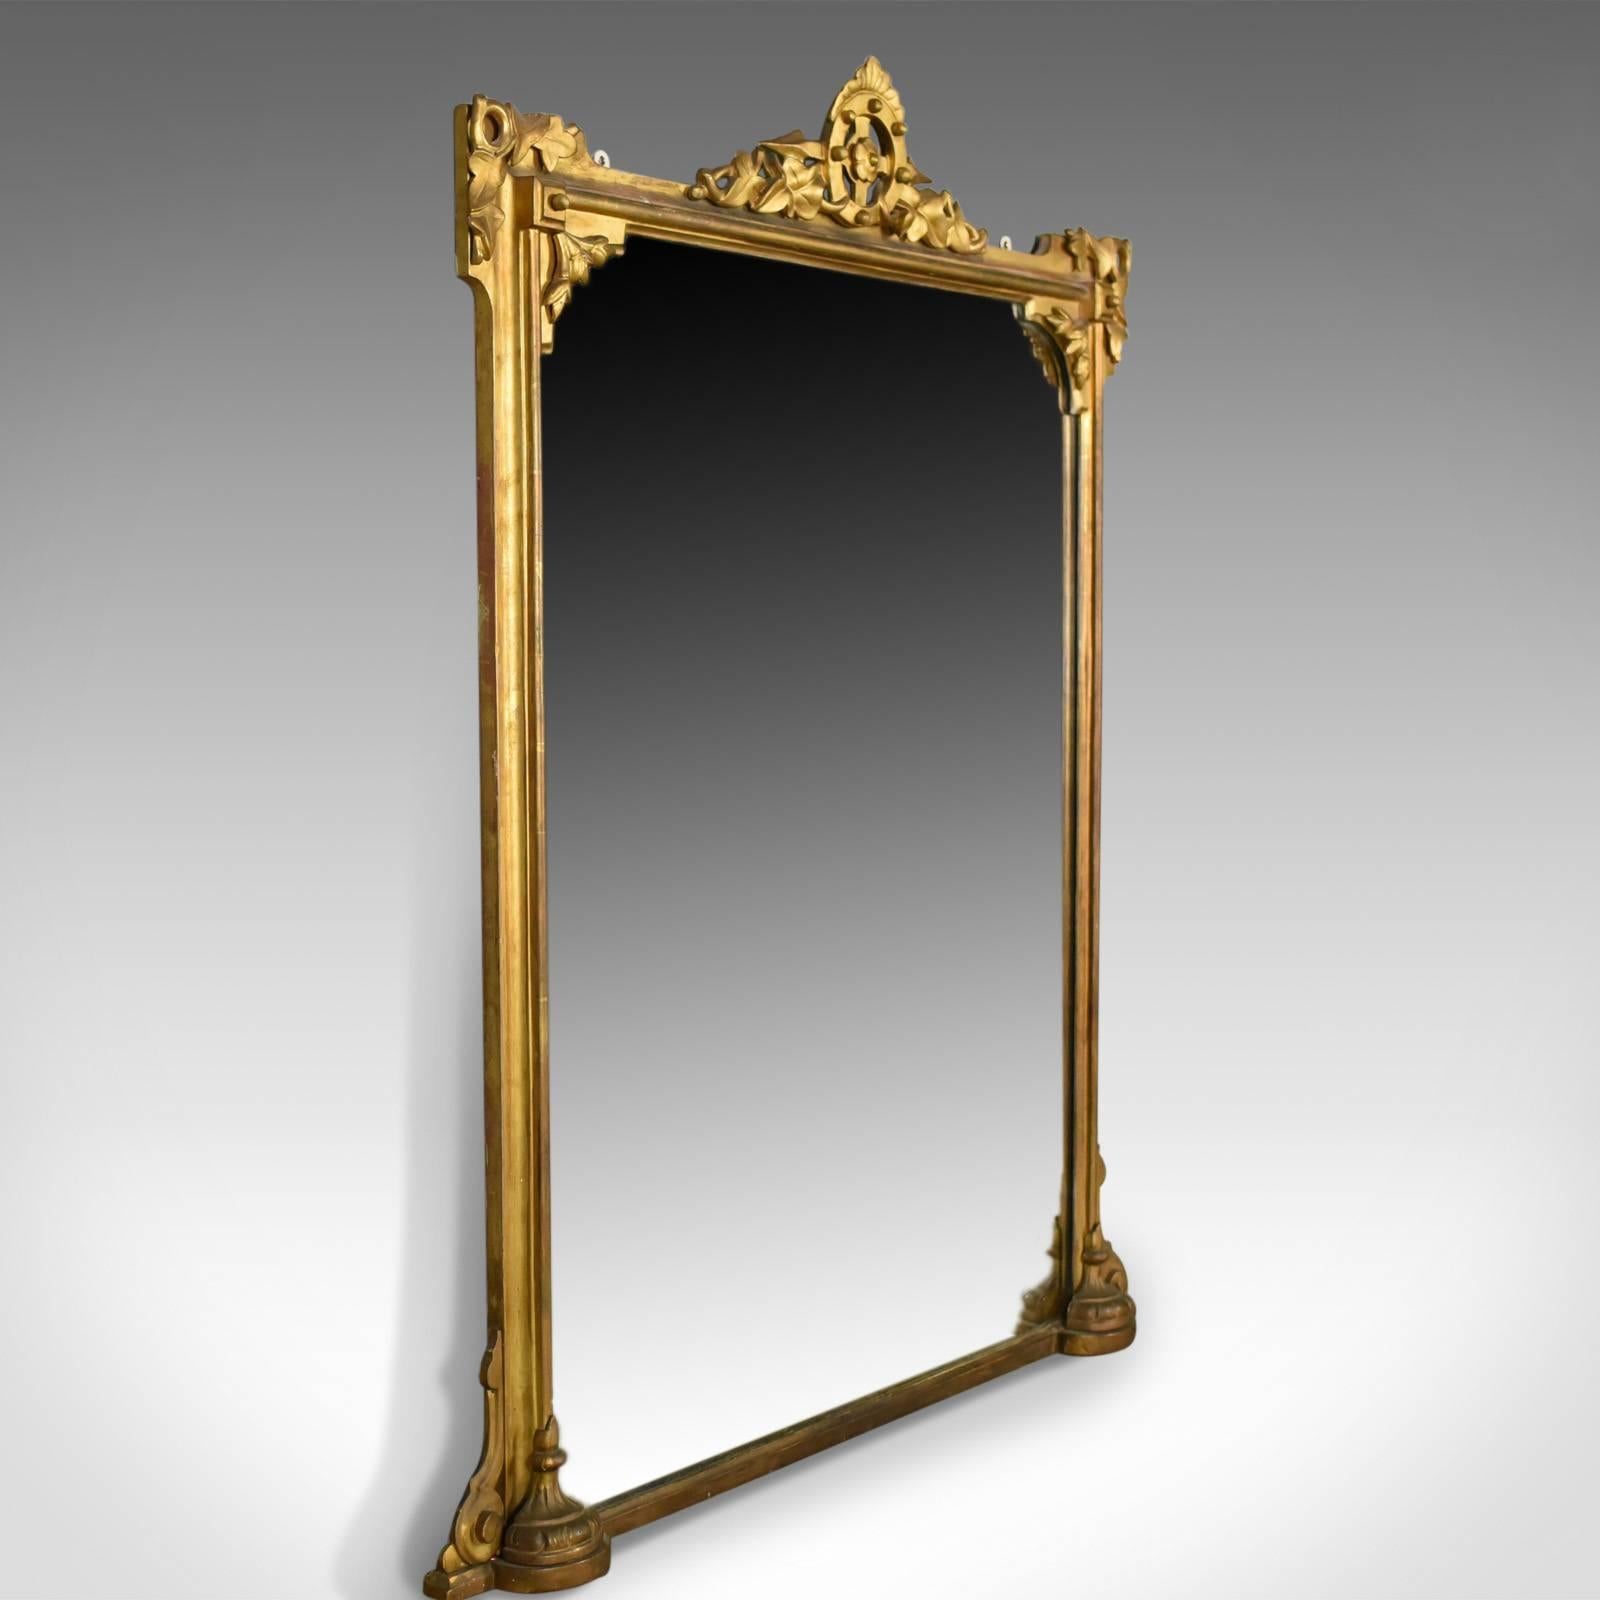 This is an antique overmantel mirror, an English, Victorian wall mirror in giltwood and gesso frame dating to circa 1850.

Attractive golden tones in the giltwood frame
A refined piece displaying nautical overtones
The crest a rosette in compass